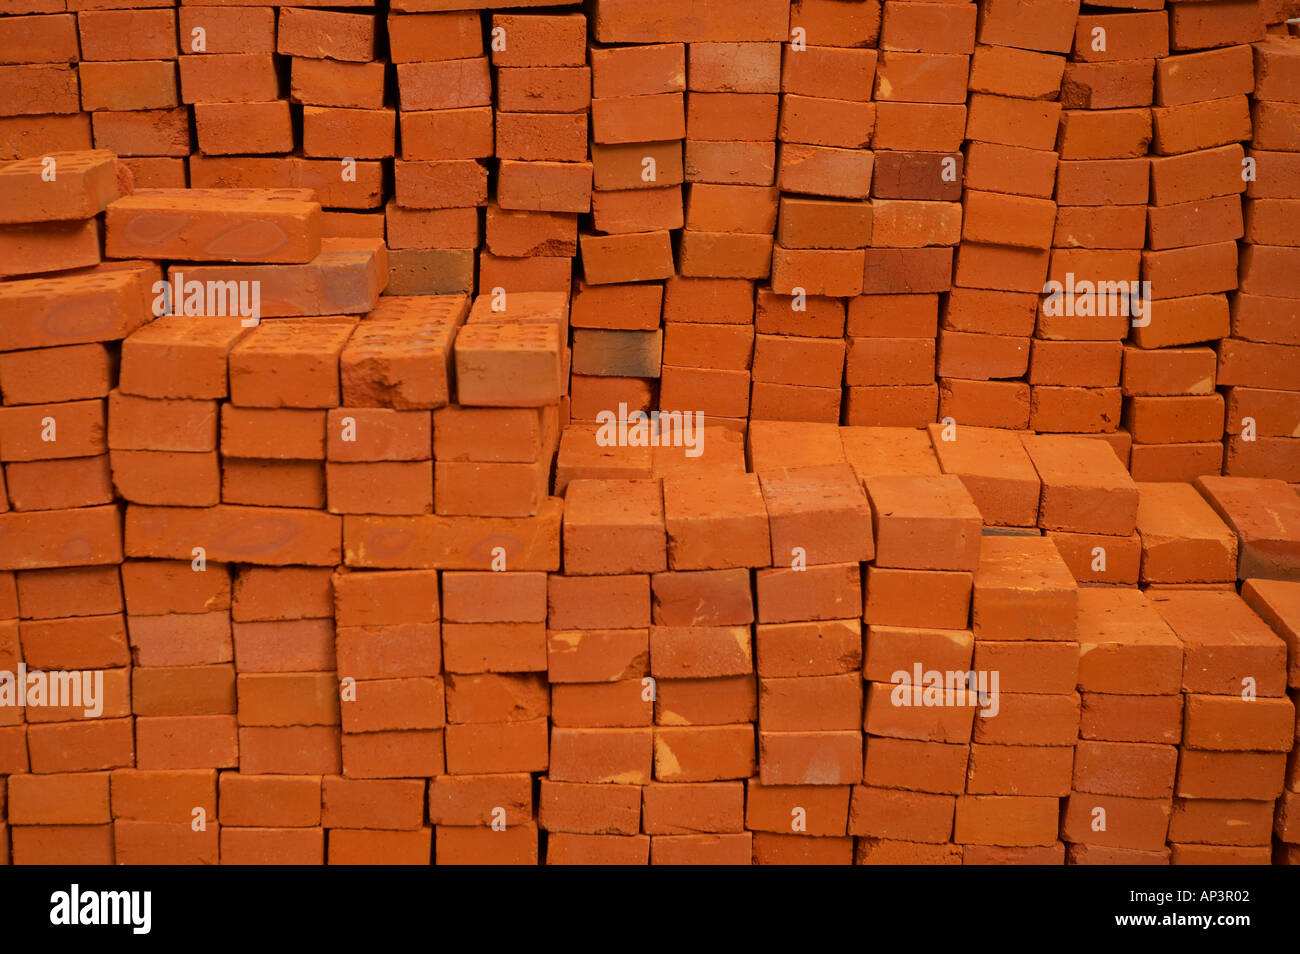 PILE OF RED BRICKS ON BUILDING SITE Stock Photo